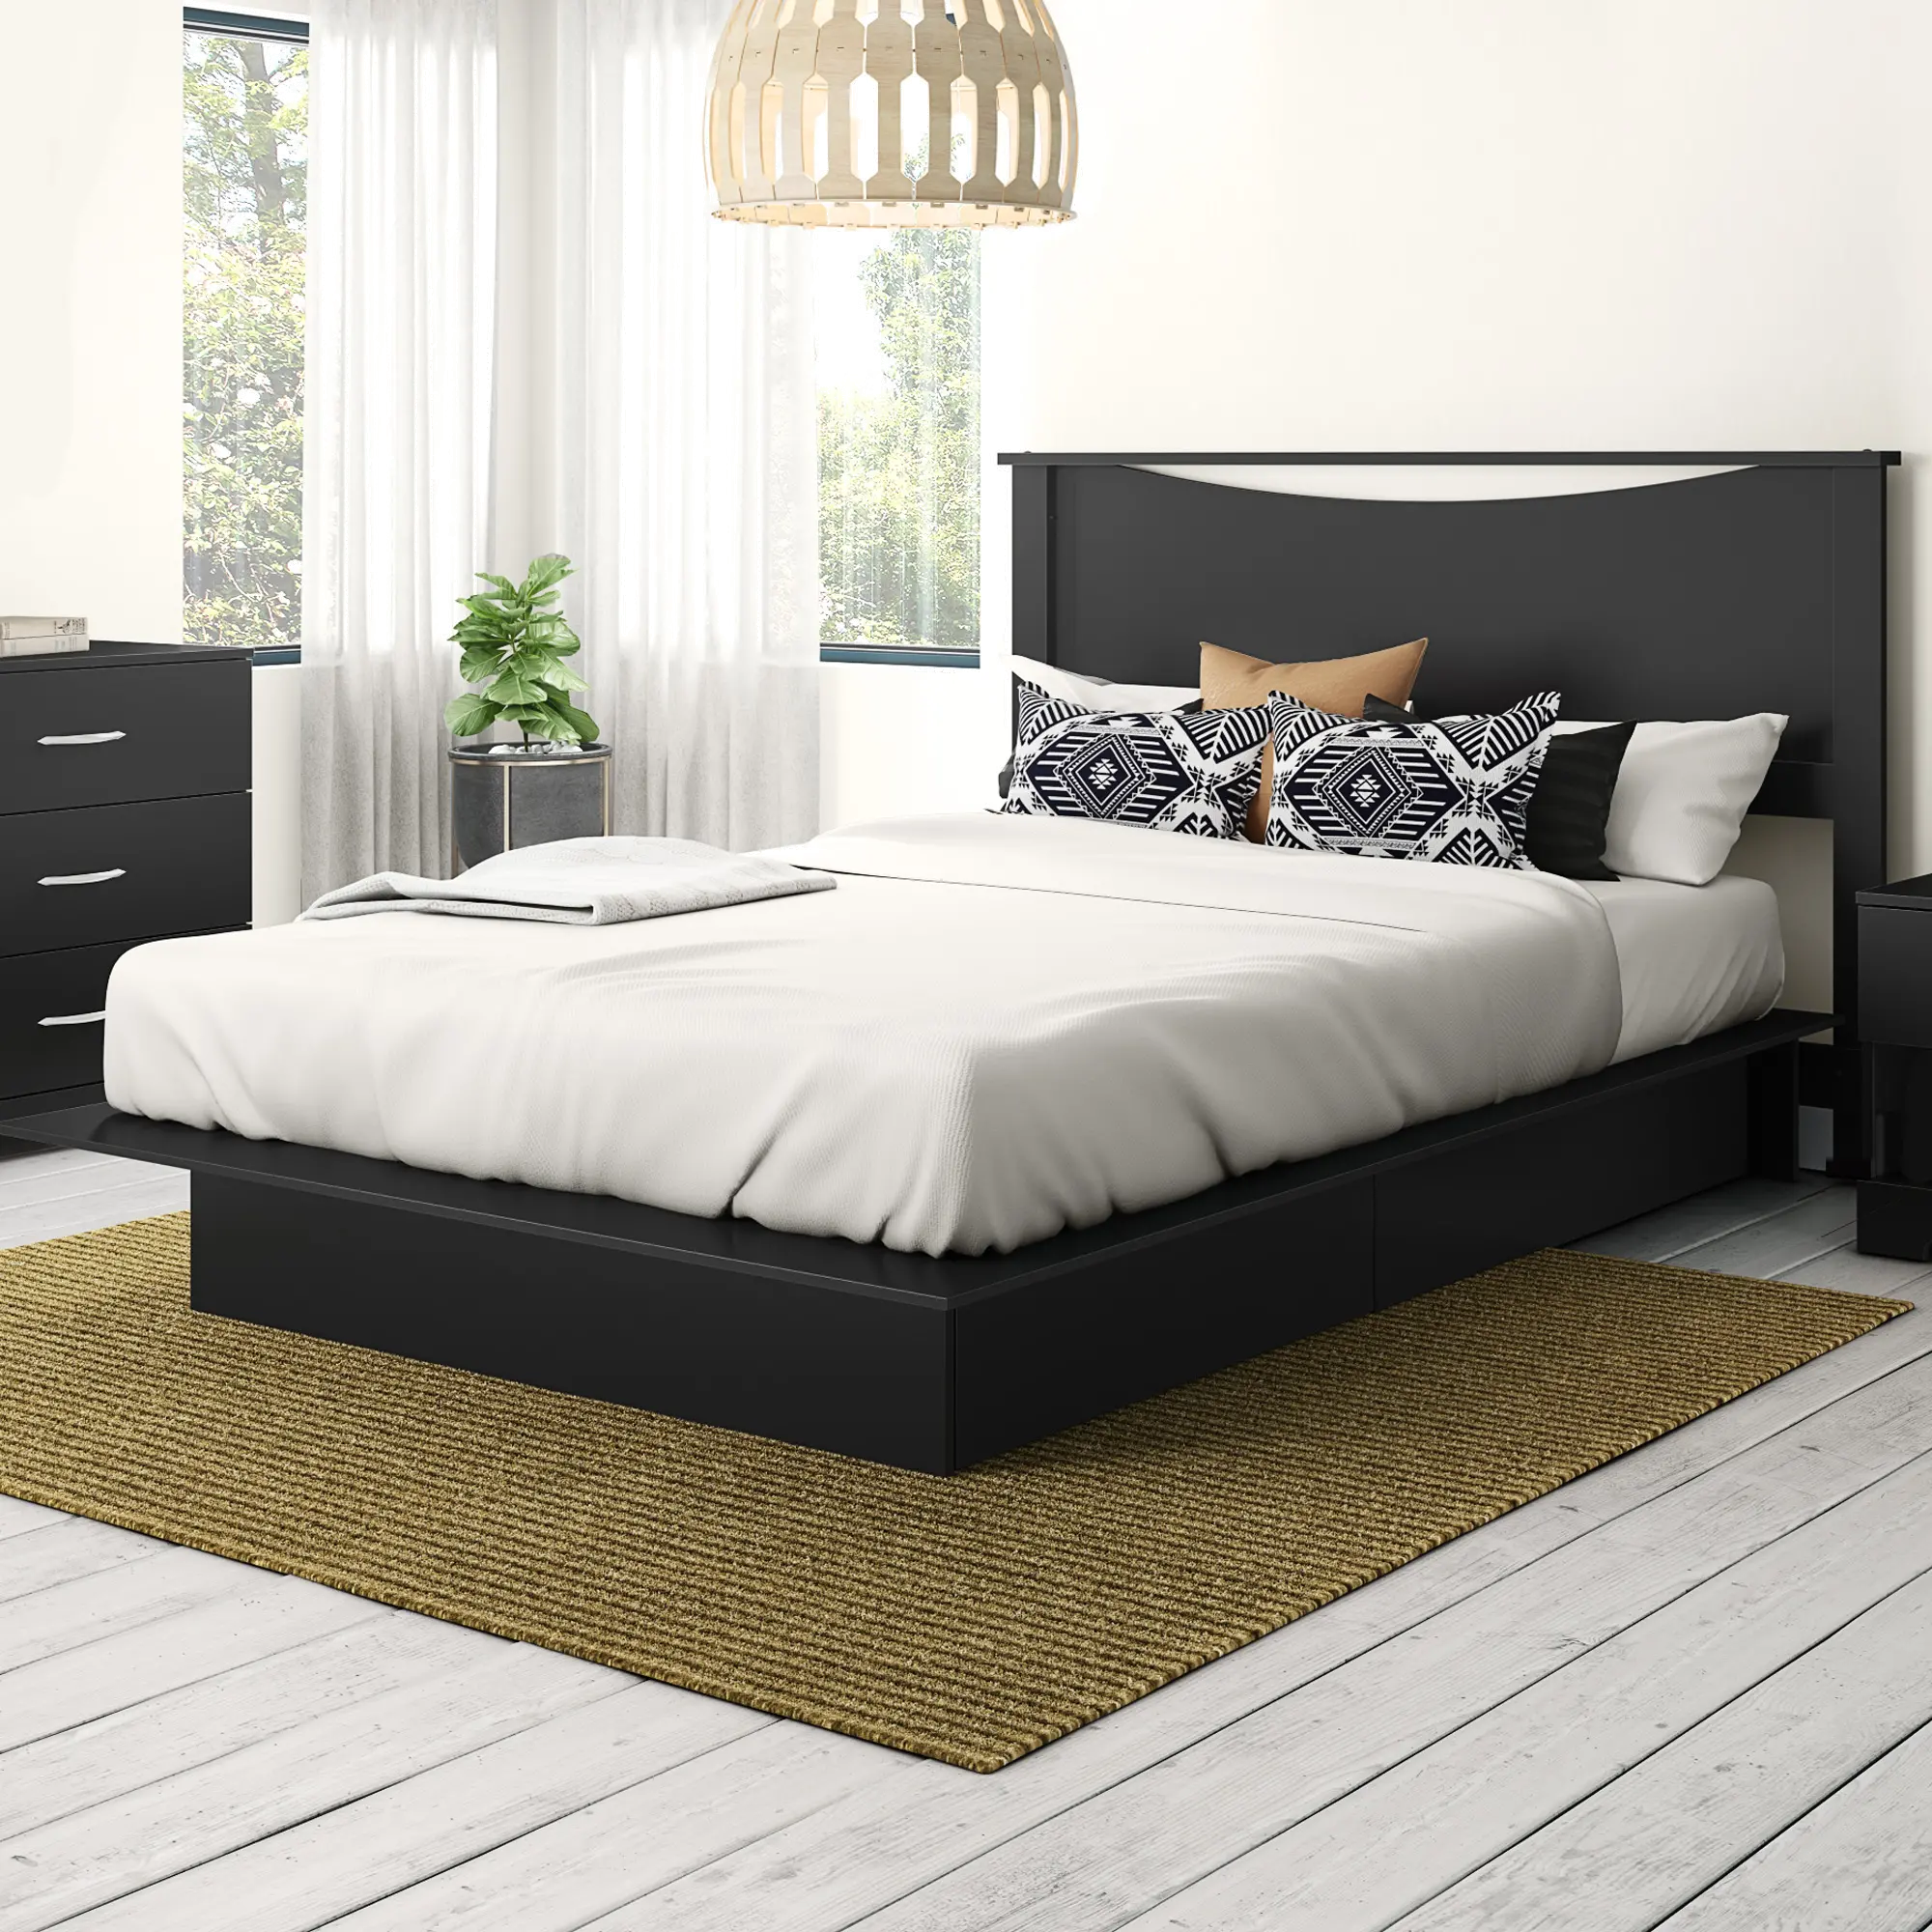 Step One Black Full/Queen Bed and Headboard Set - South Shore